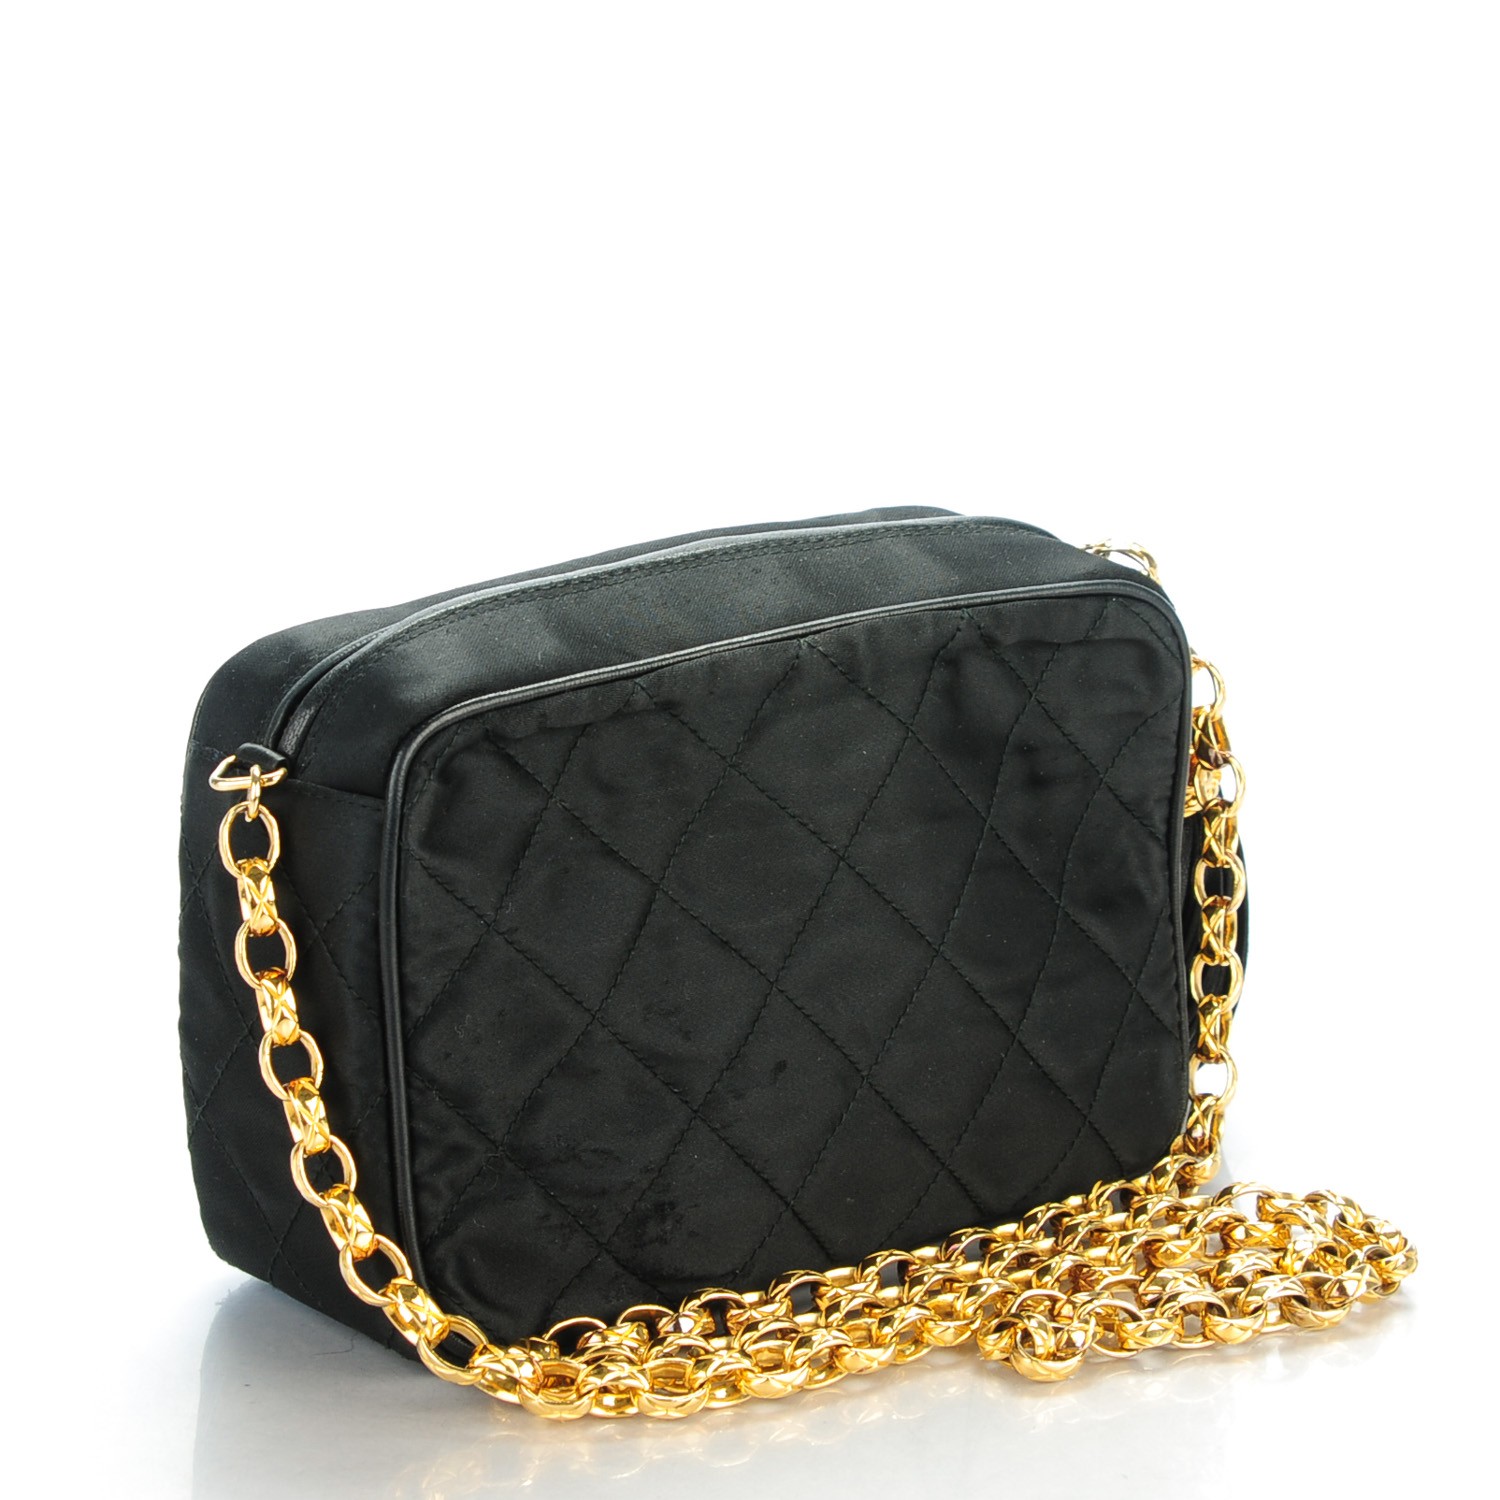 CHANEL Quilted Satin Camera Bag Black 142302